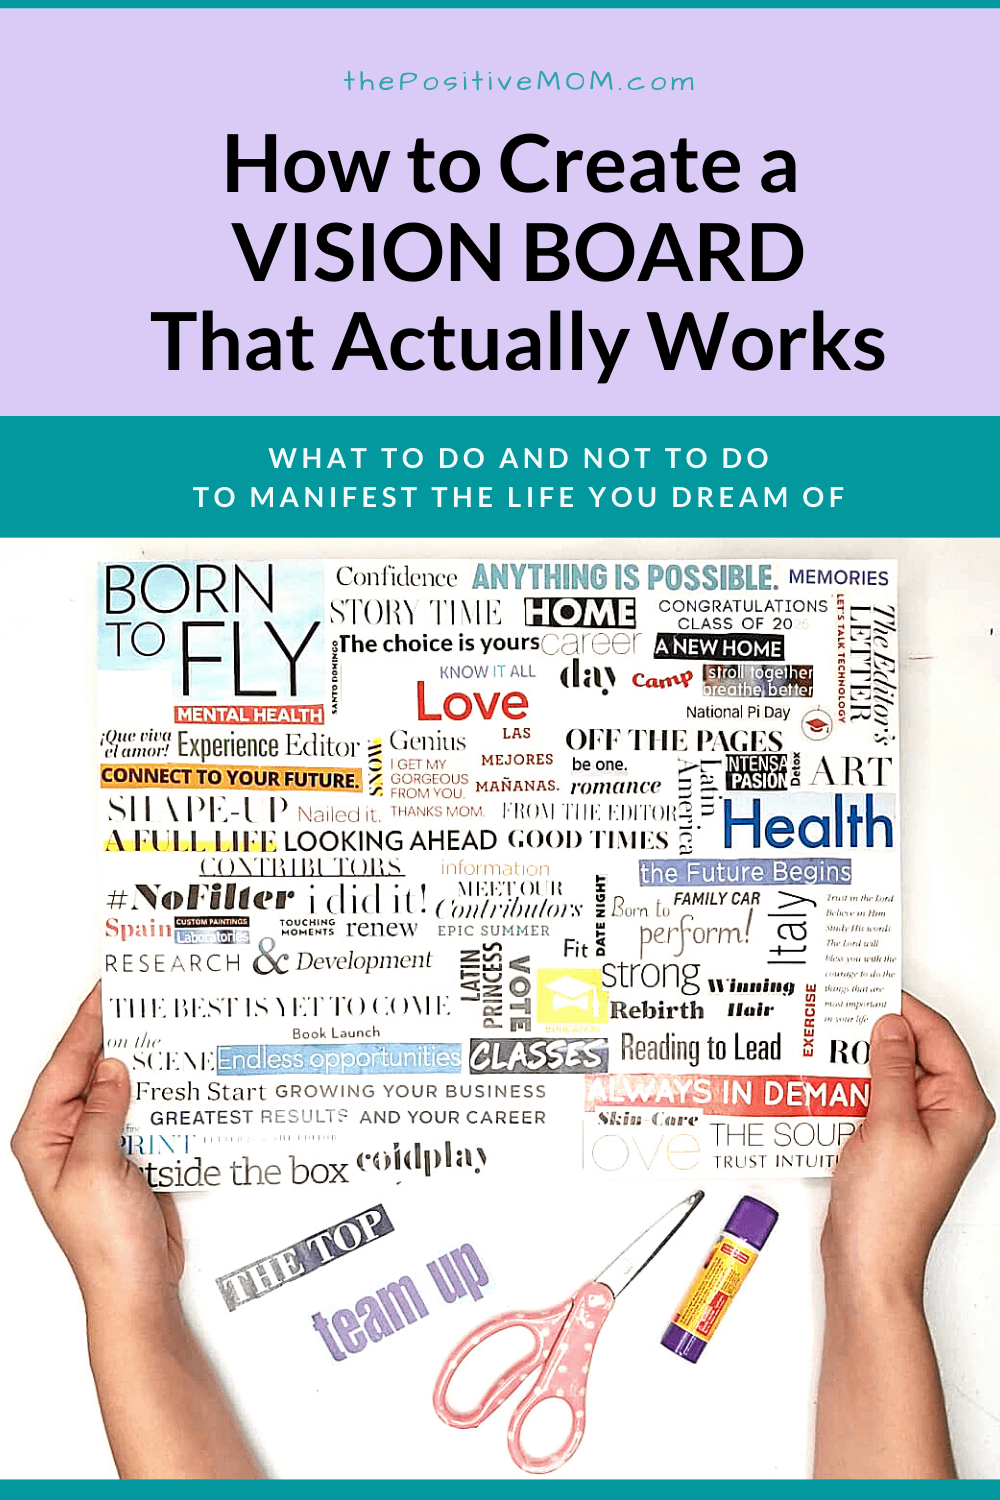 what-is-a-vision-board-and-how-does-manifesting-work-katie-crenshaw